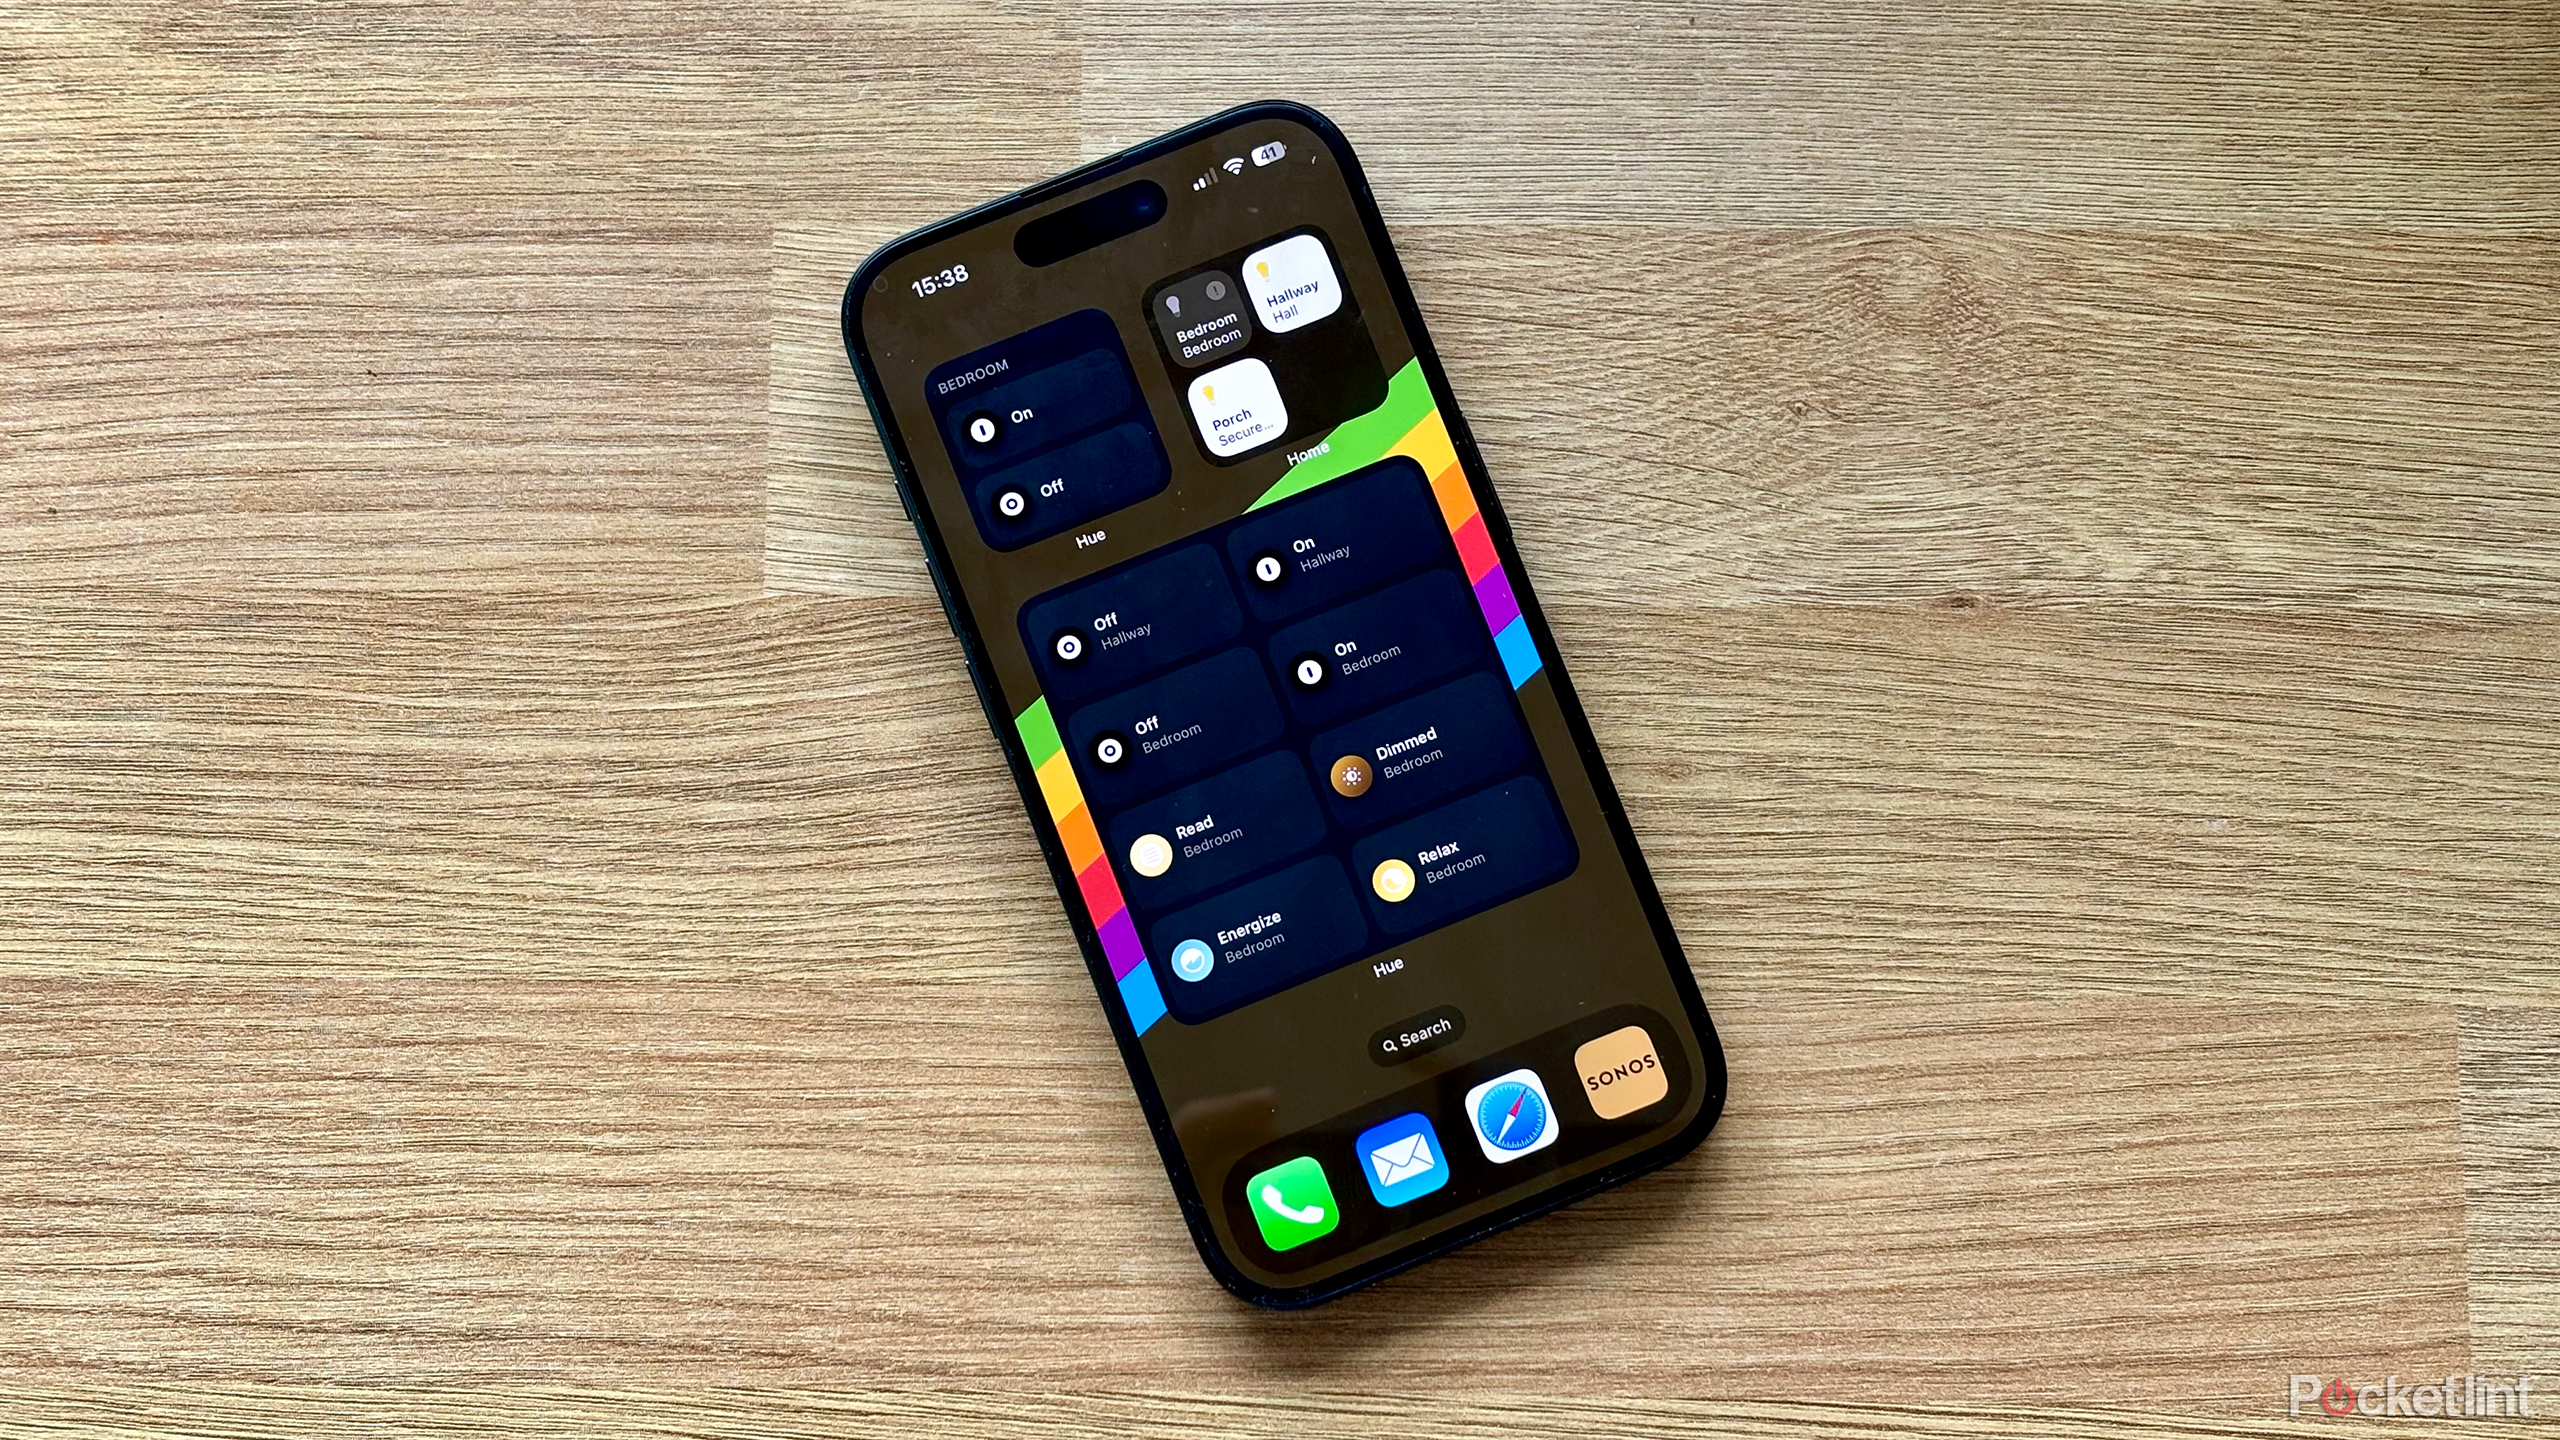 Philips Hue widgets arrive in iOS. Here's how to use them